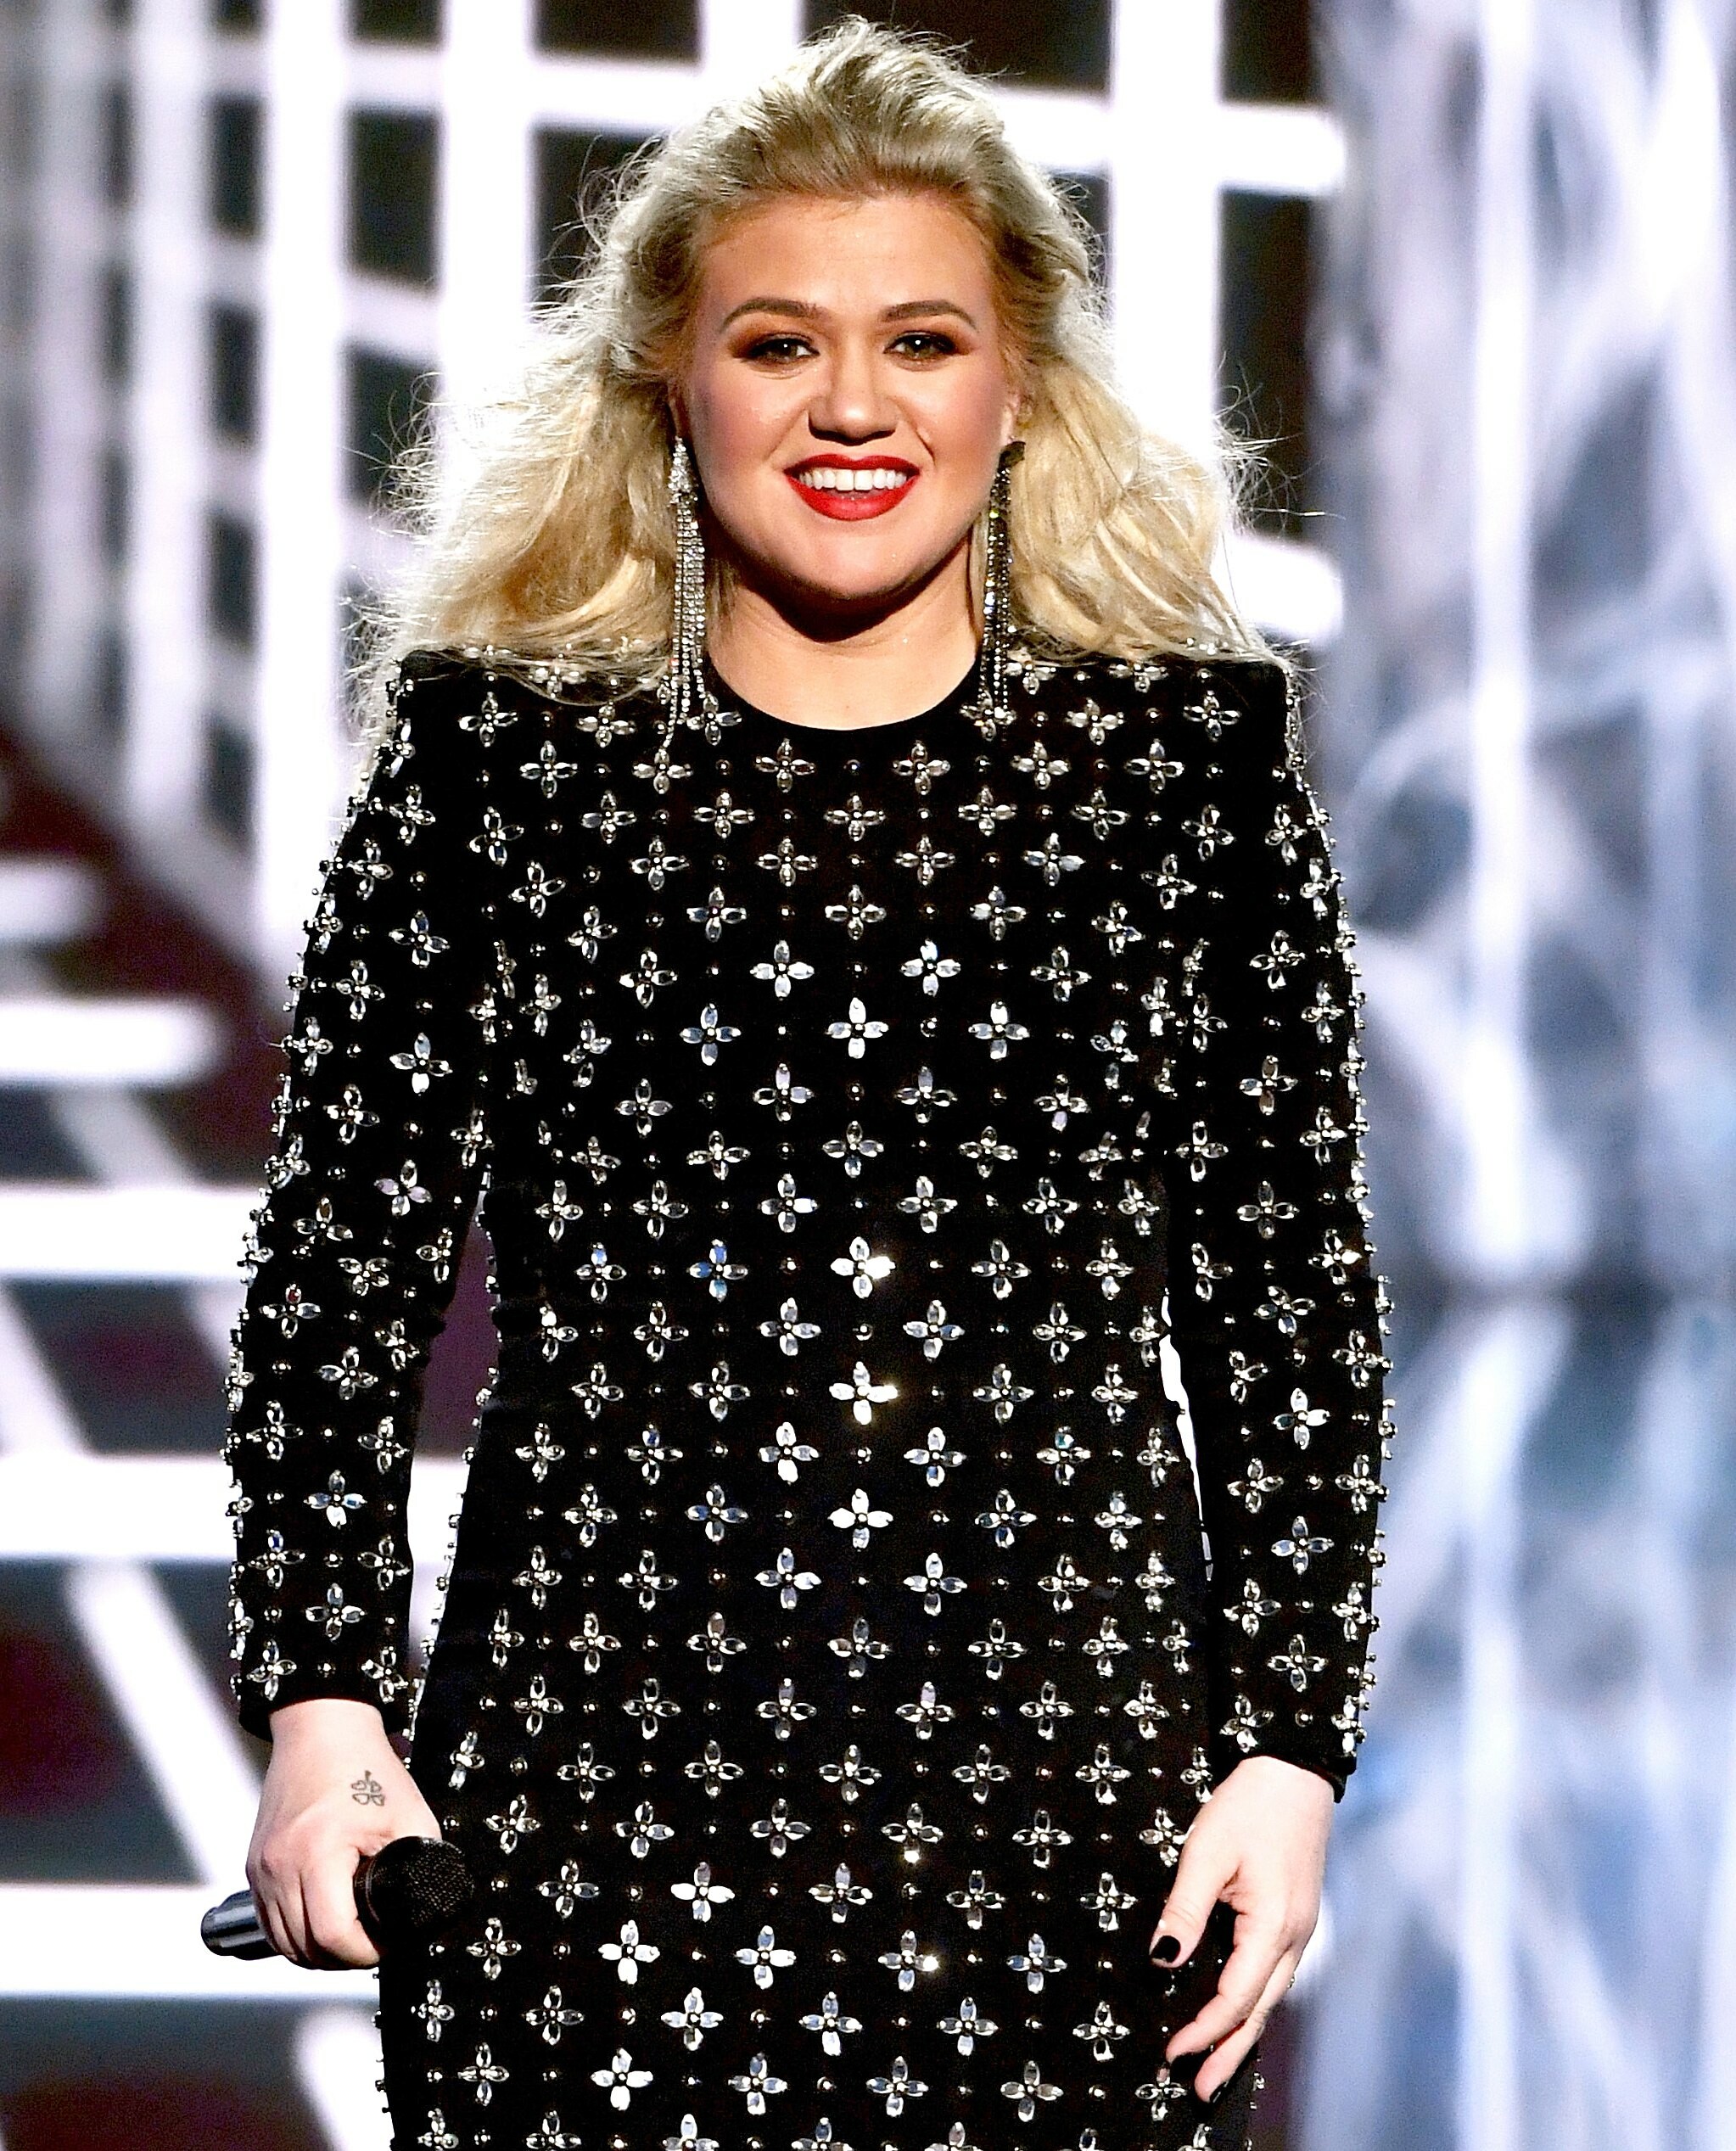 Kelly Clarkson, 2019 wallpapers, Sarah Anderson, Celebrity, 2050x2540 HD Handy